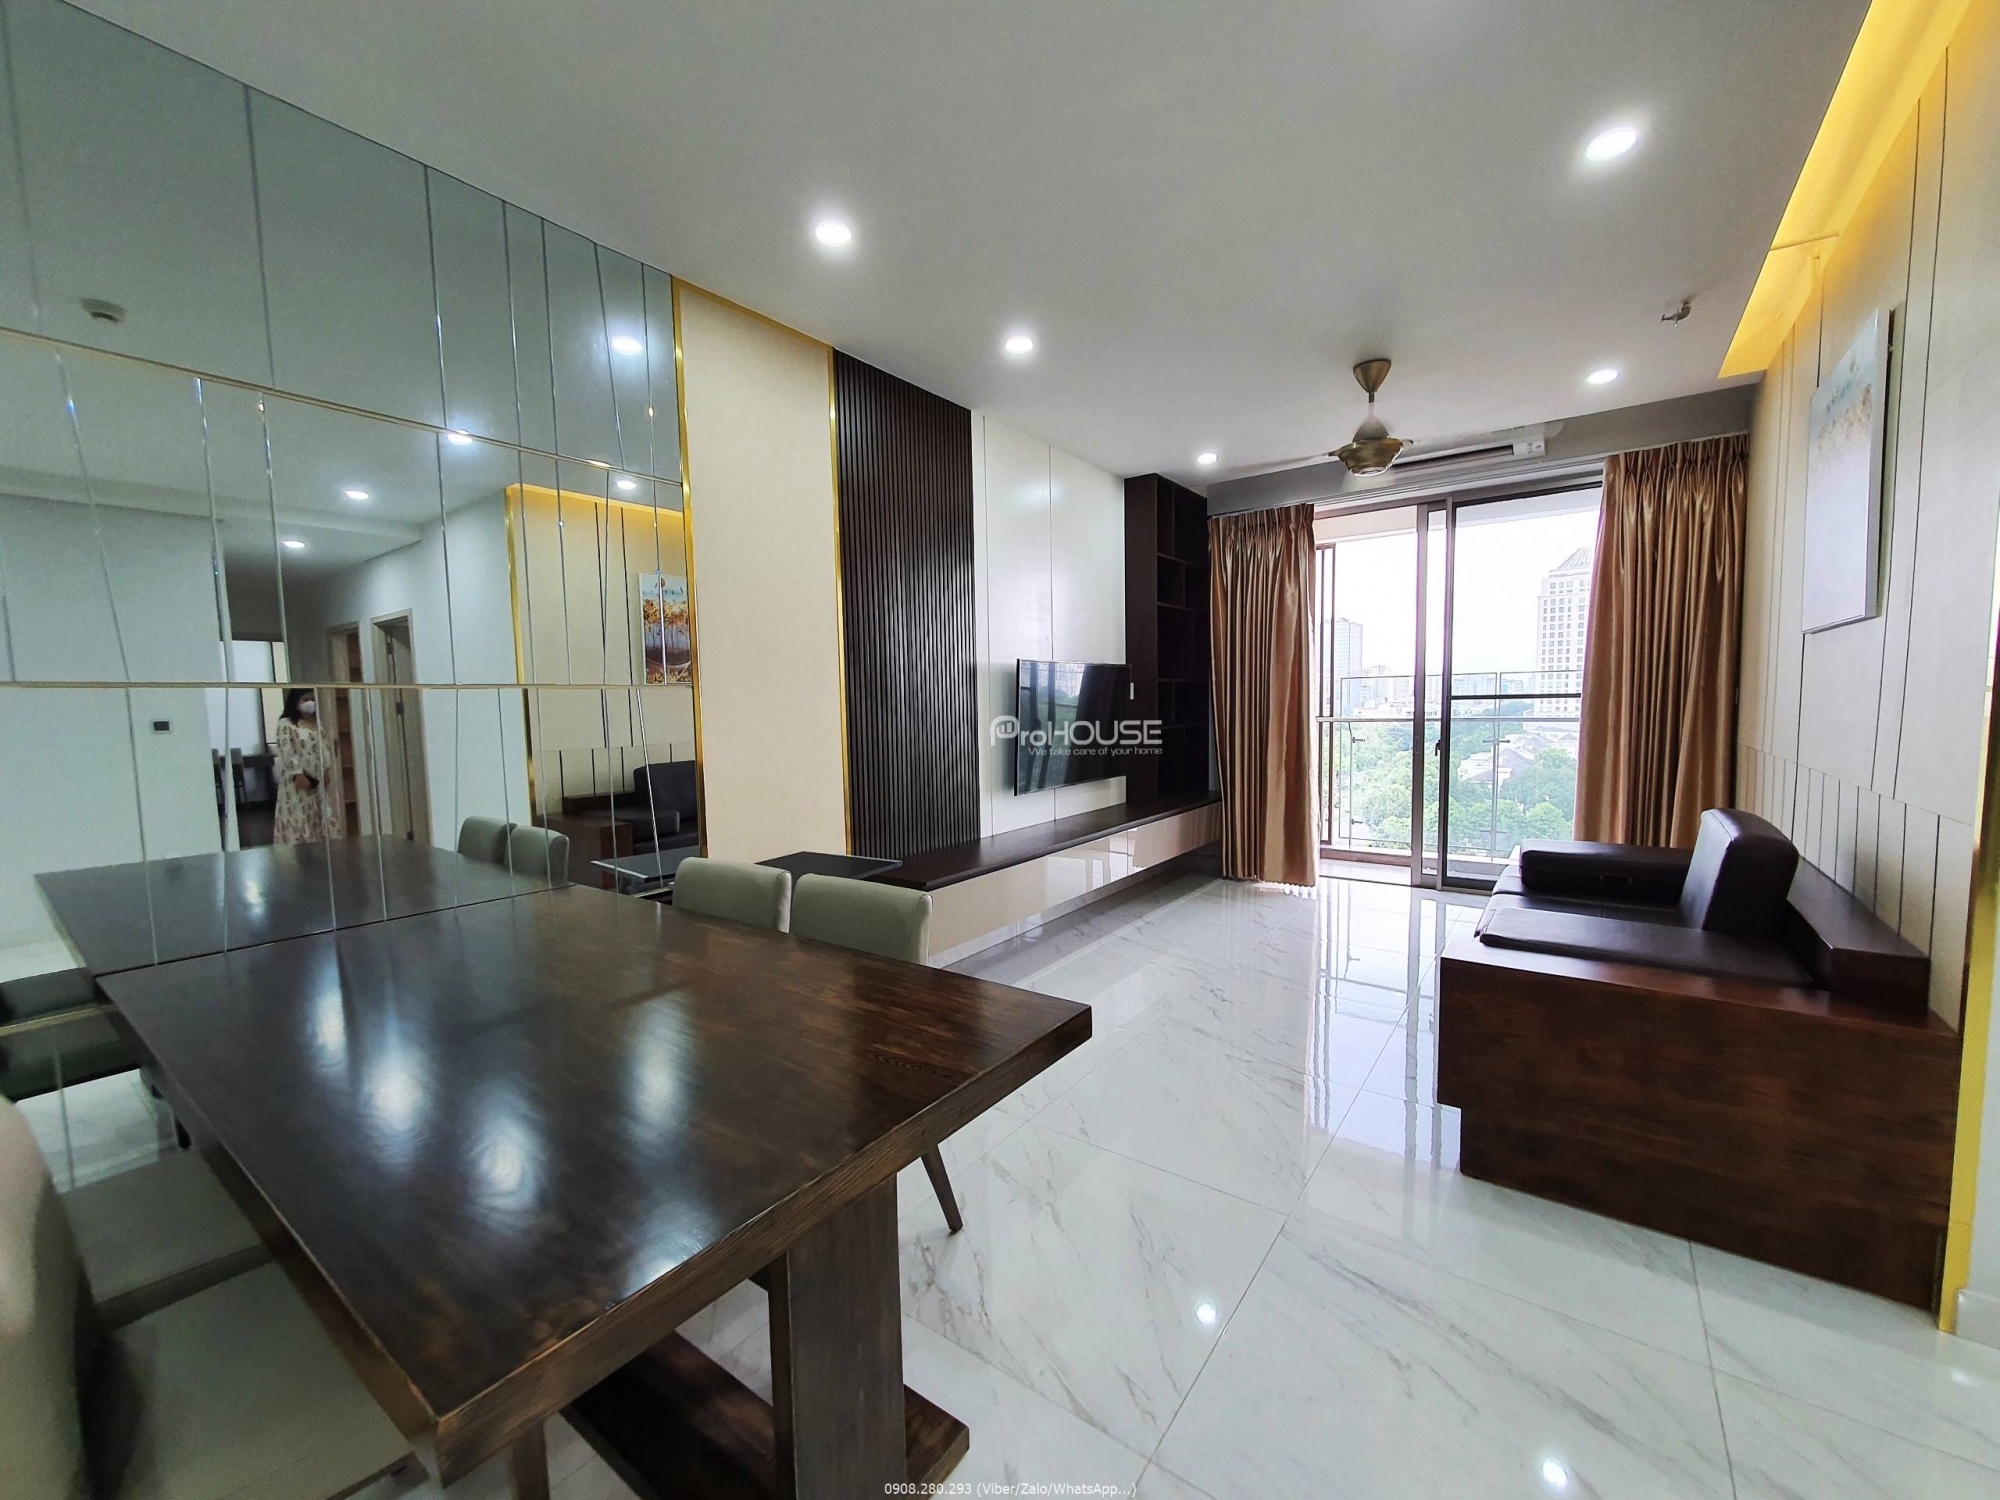 Big size 3br apartment in Midtown M5 for sale with cheap price only VND 8.4B